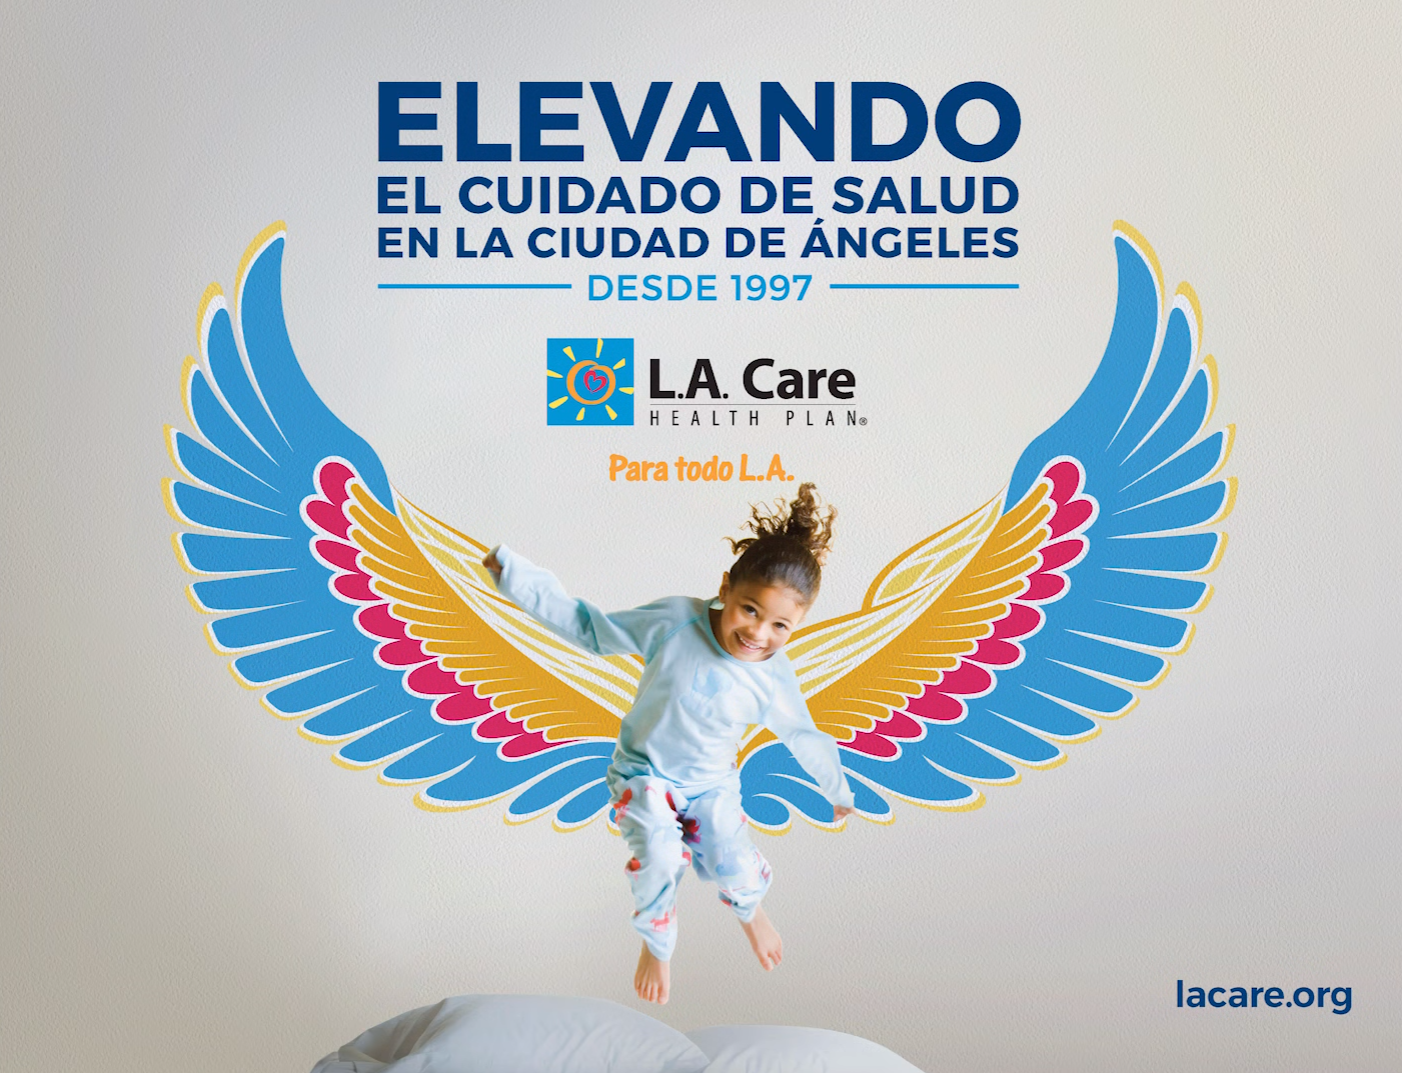 L.A. Care Launches New Marketing Campaign to Reinvigorate its Brand